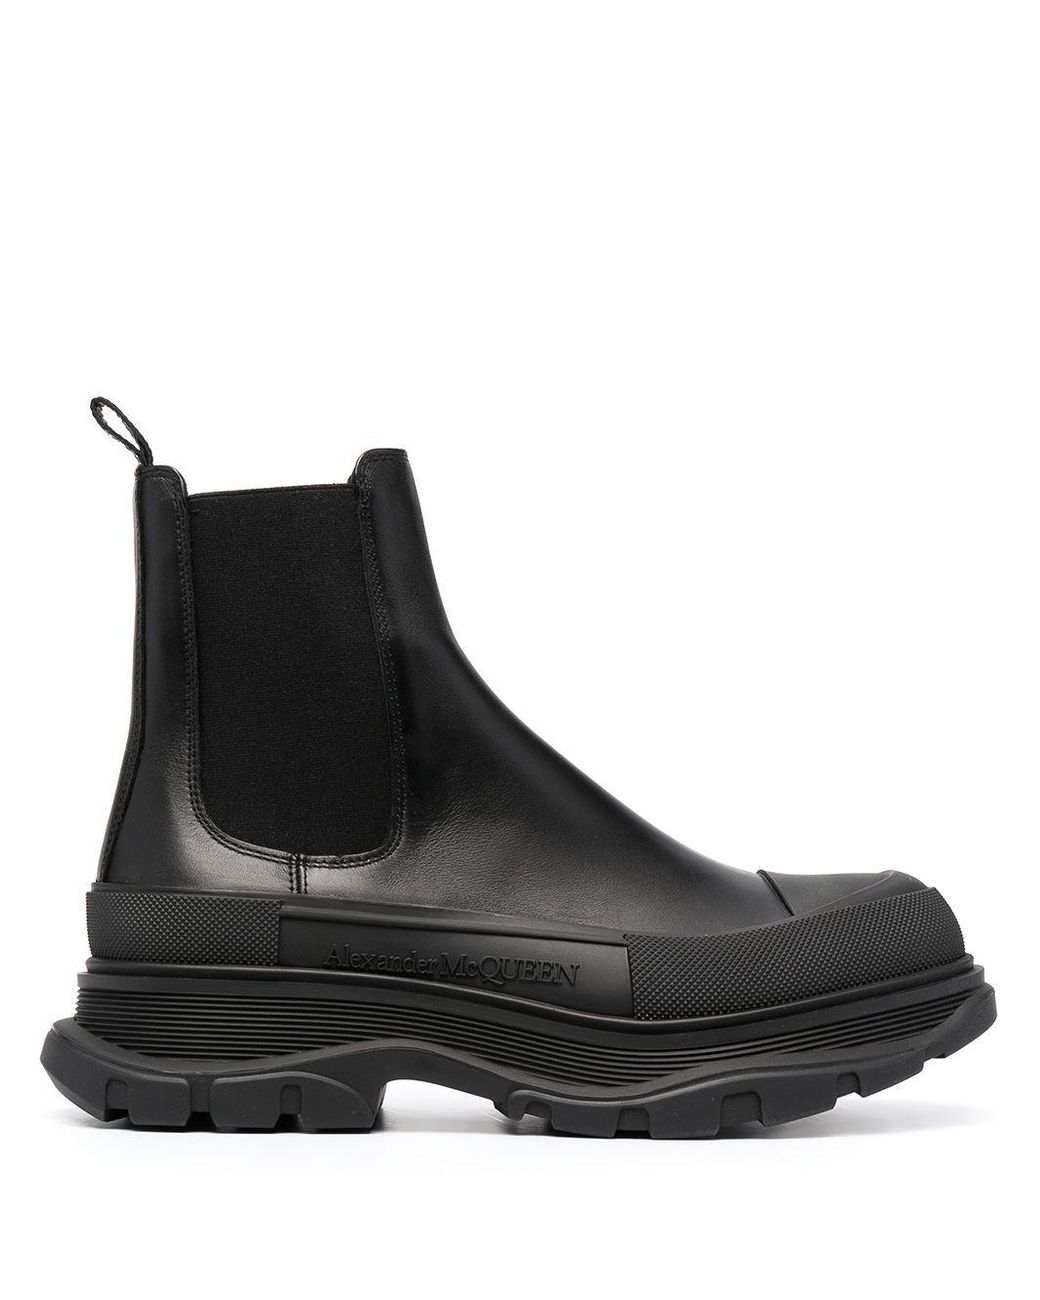 Alexander McQueen Leather Boots Black for Men - Save 4% - Lyst